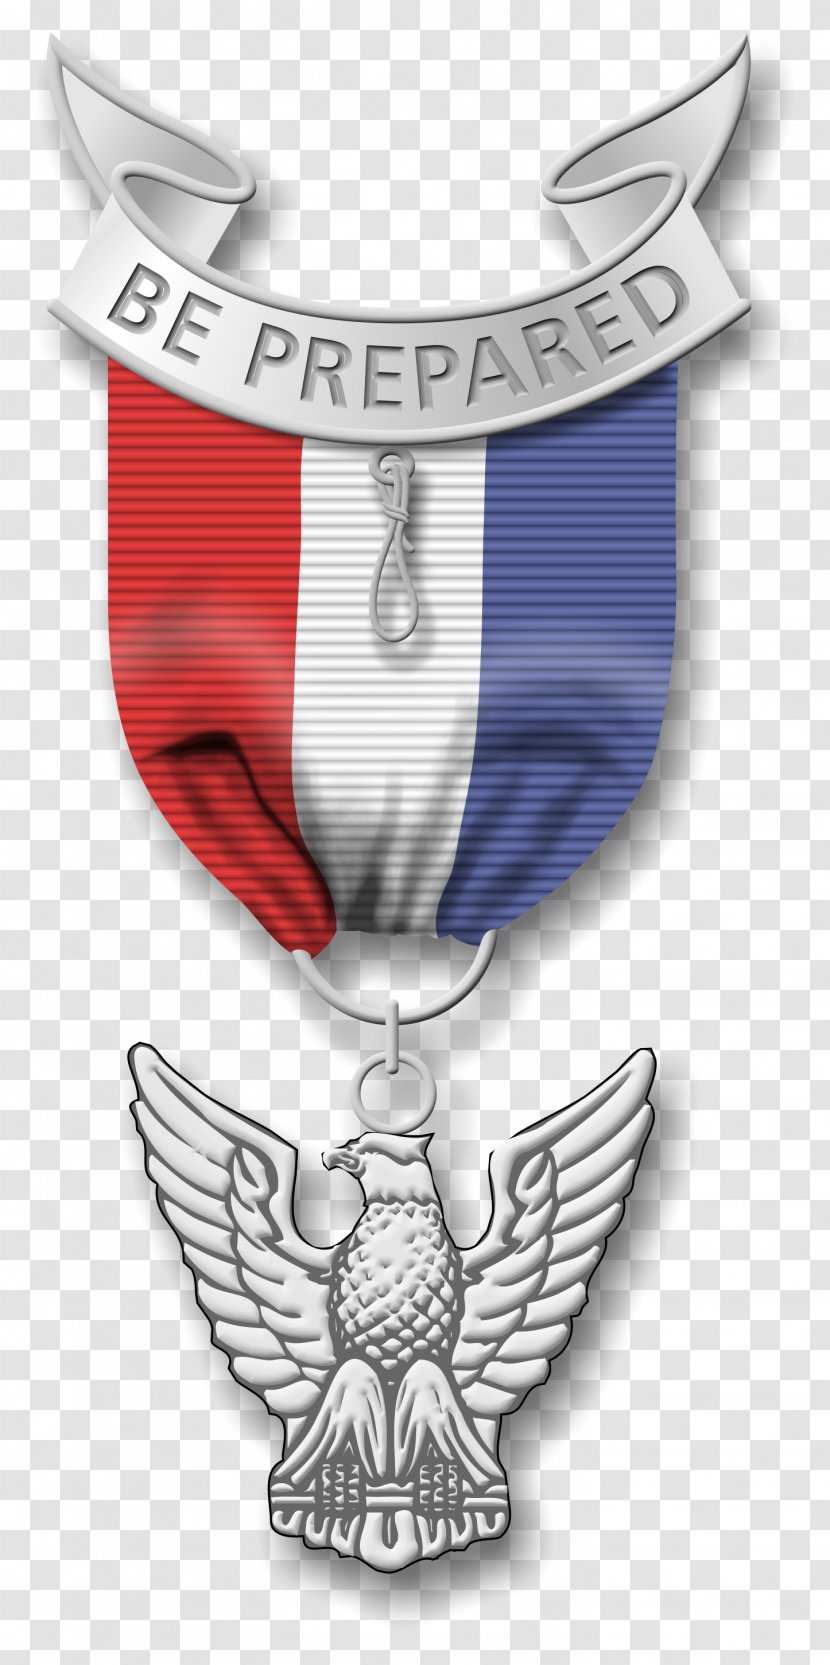 Eagle Scout Boy Scouts Of America Scouting Medal Clip Art - Symbol Transparent PNG